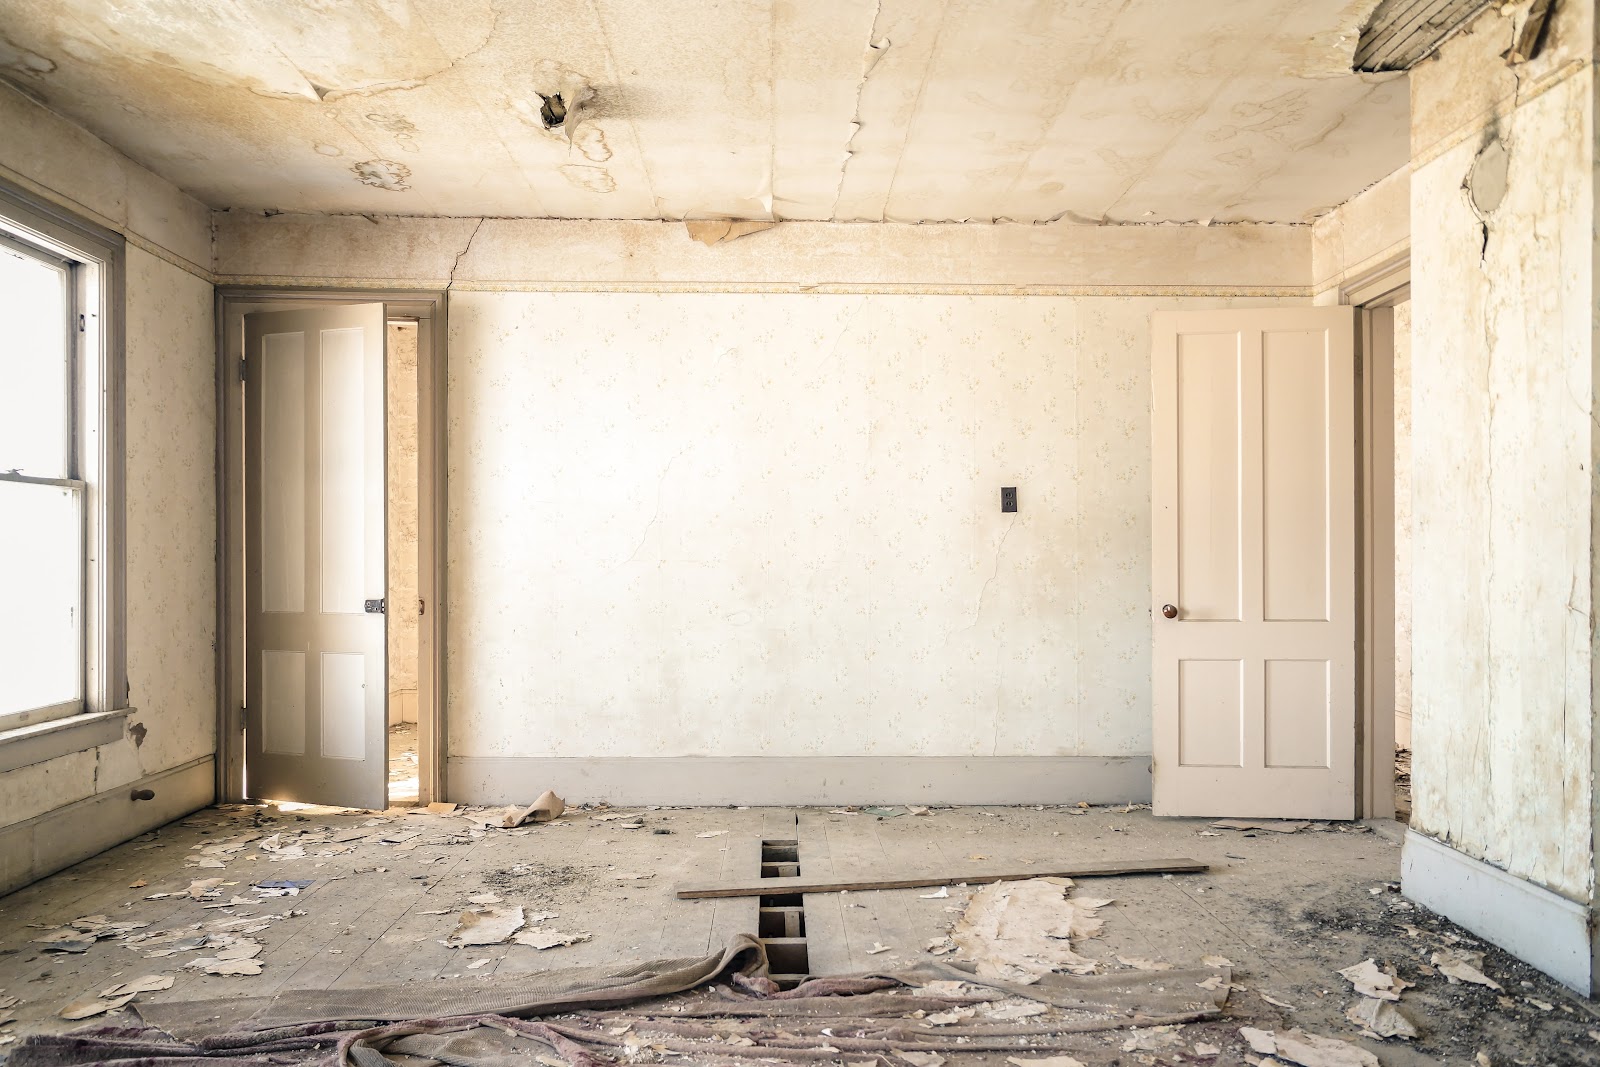 Where To Stay During A Home Renovation